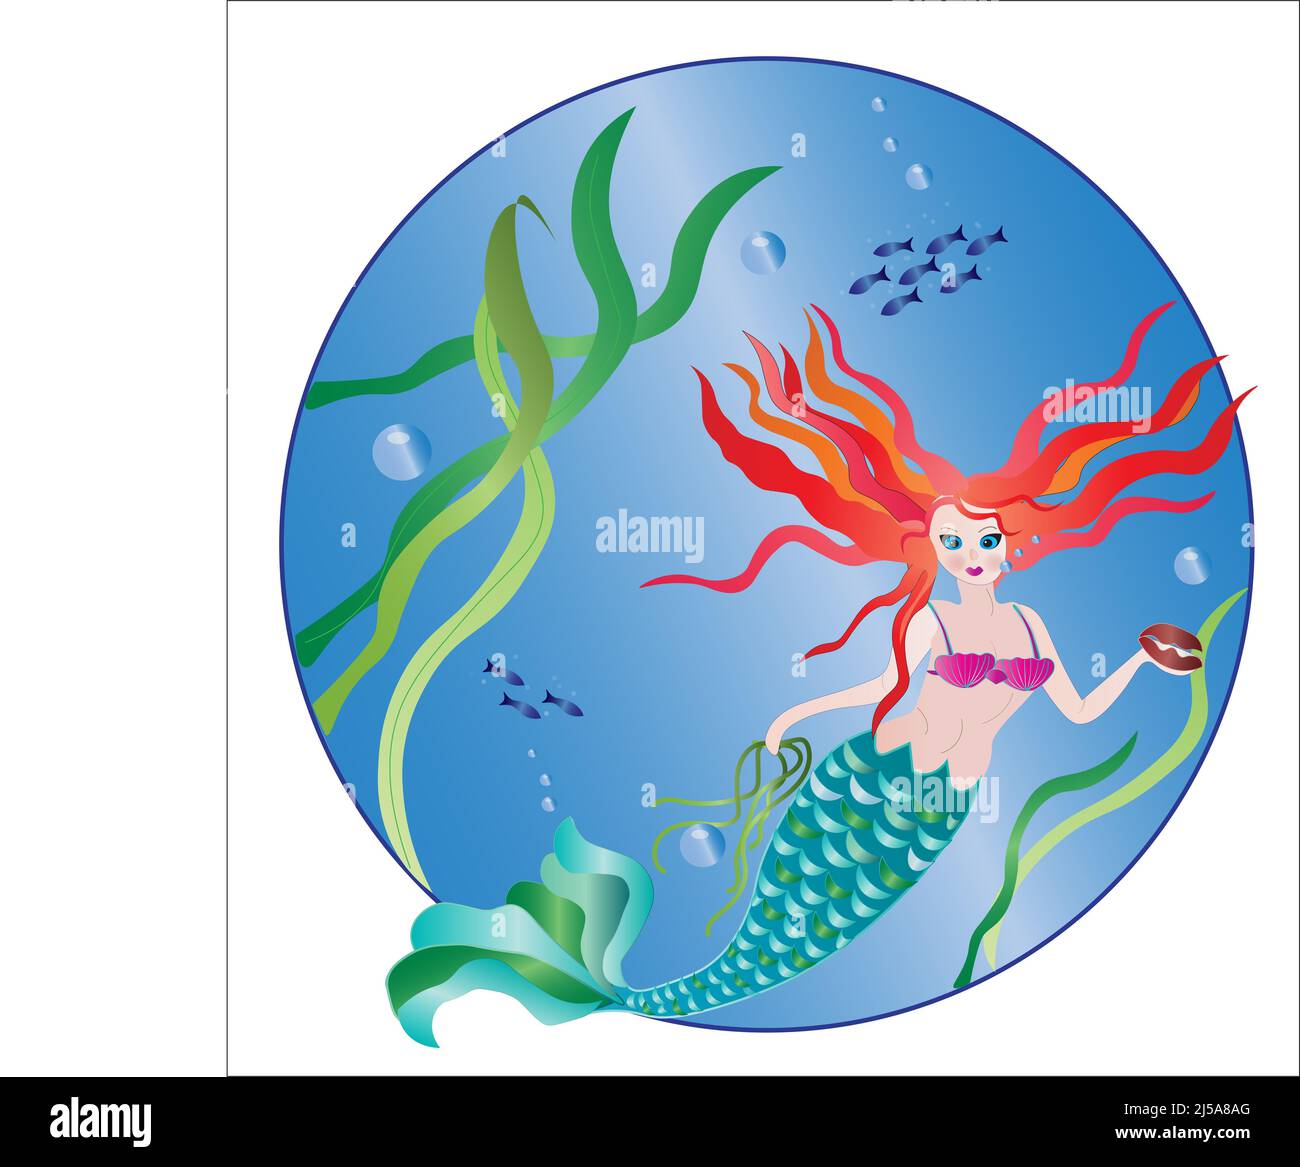 Graphic illustration of a Mermaid with Globe-like design Stock Photo